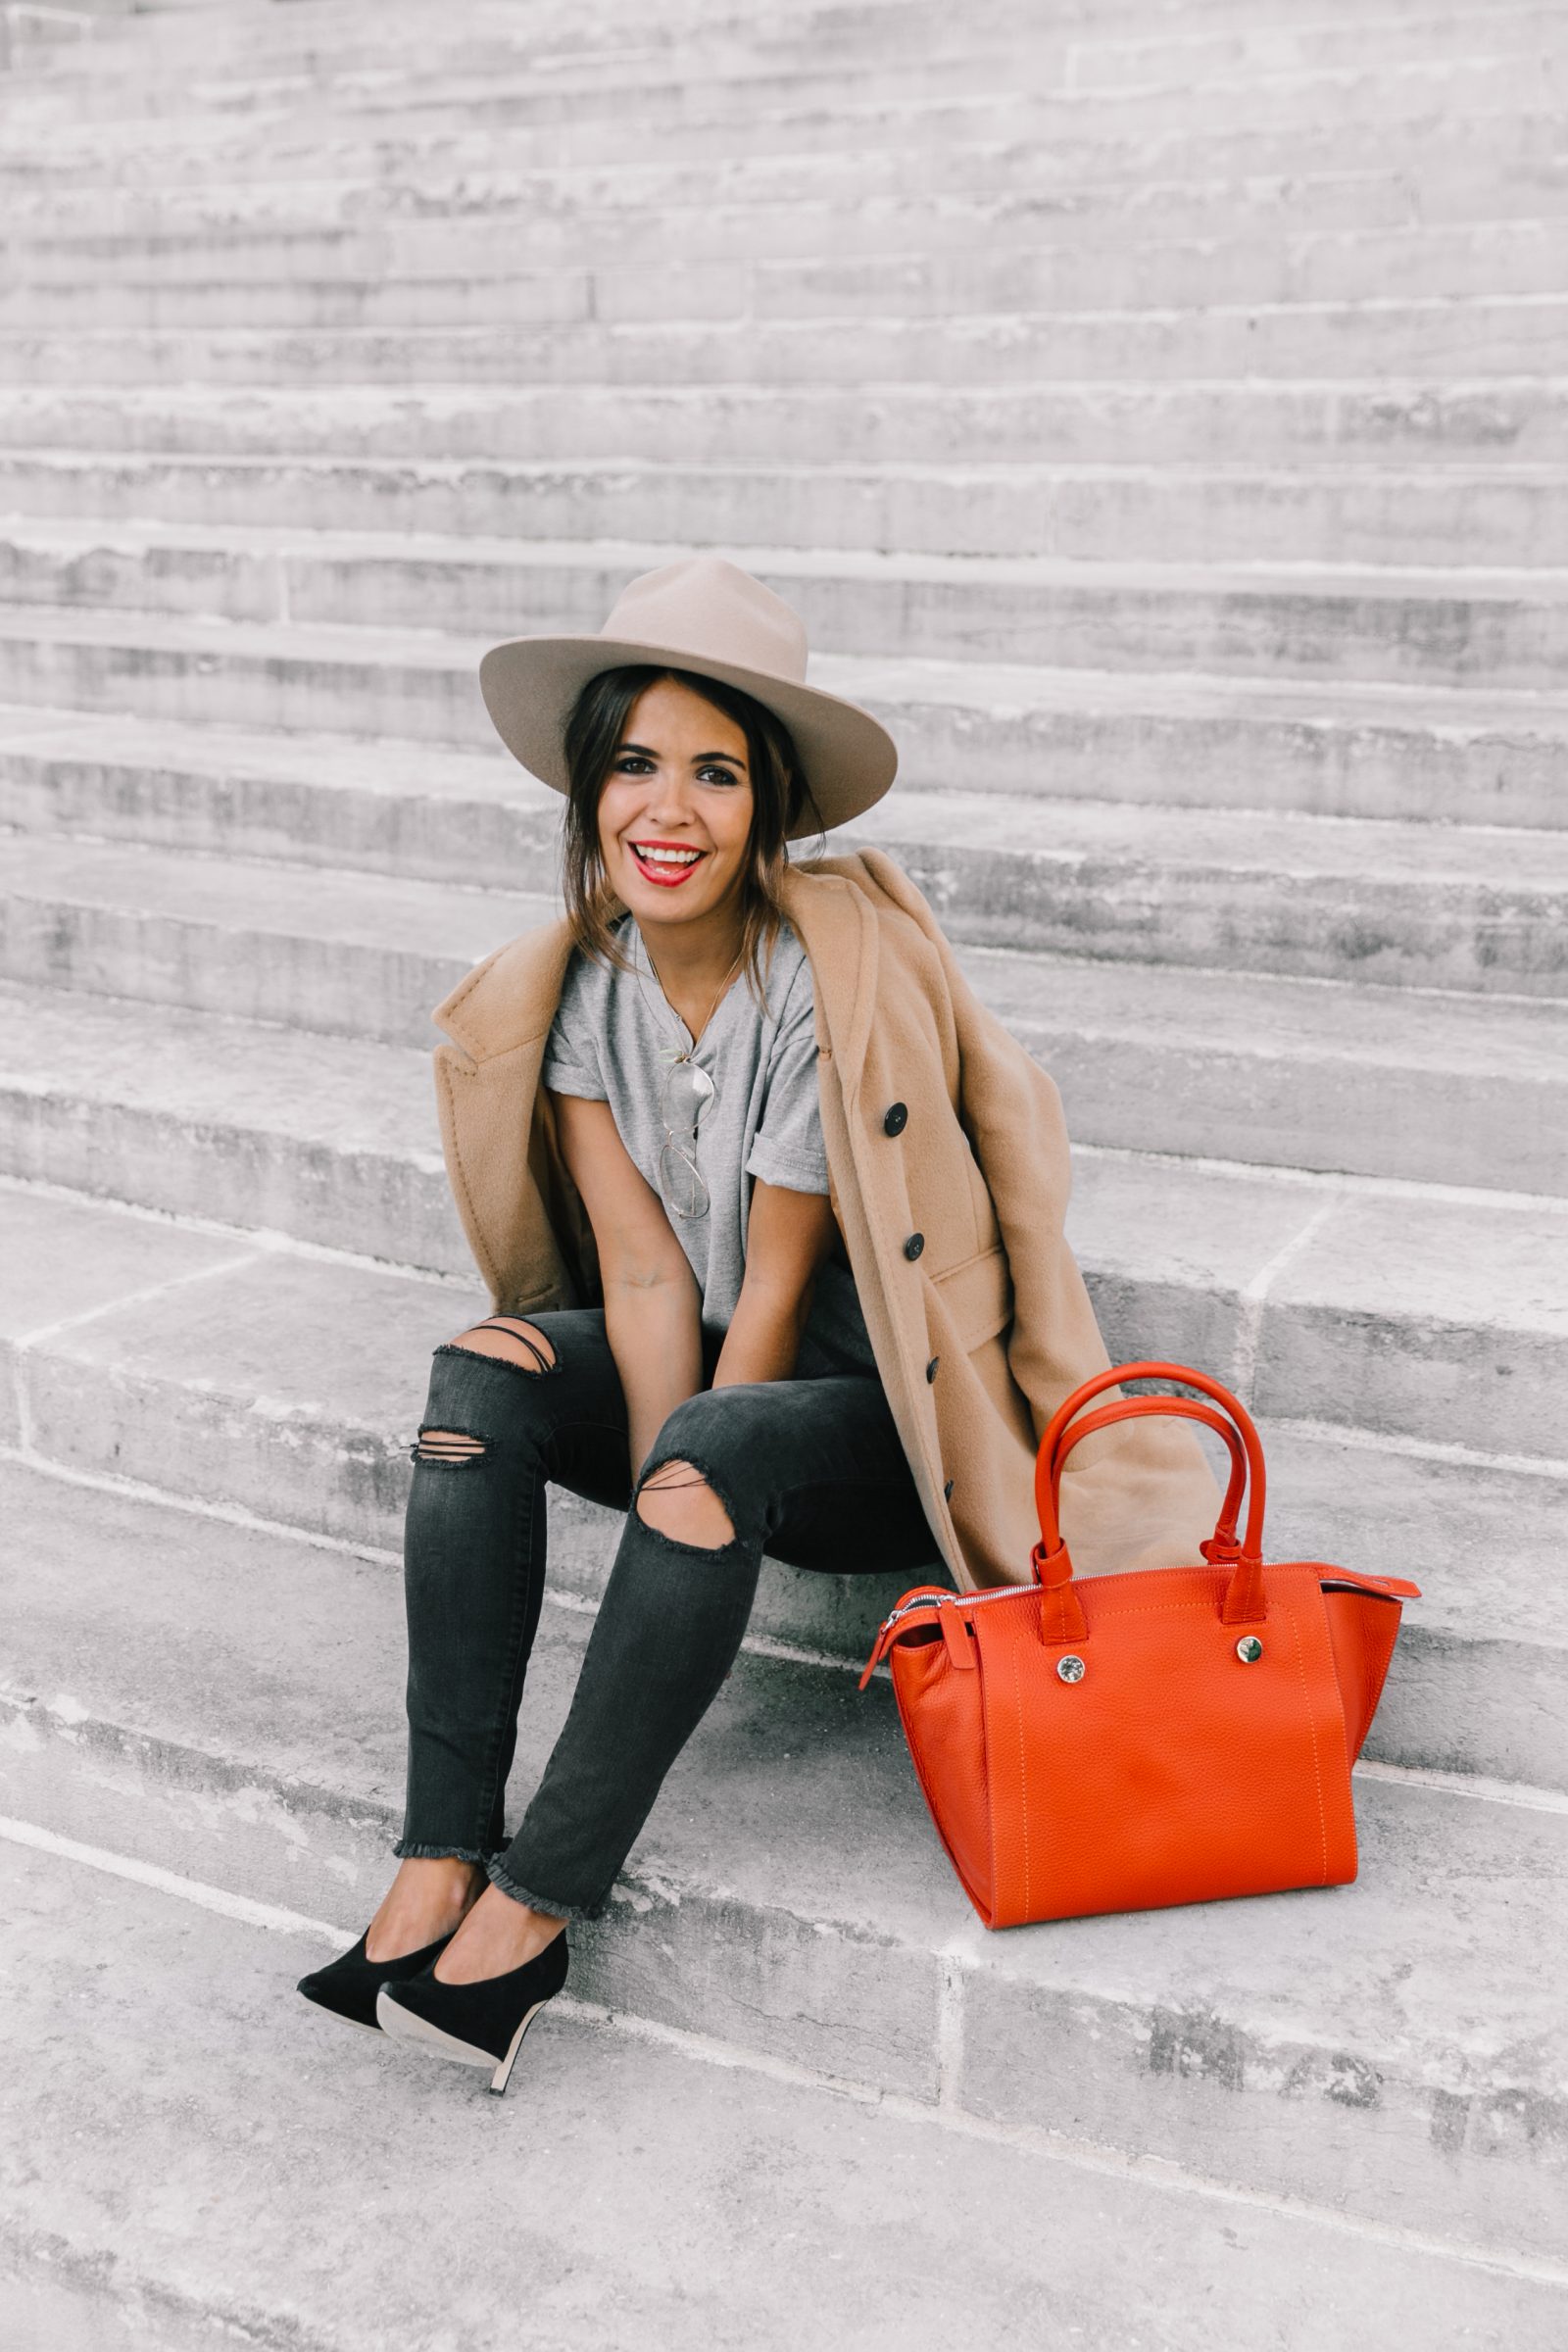 pfw-paris_fashion_week_ss17-street_style-outfits-collage_vintage-max_and_co-camel_coat-orange_bag-skinny_jeans-sandro_shoes-hat-sincerely_jules_jeans-42